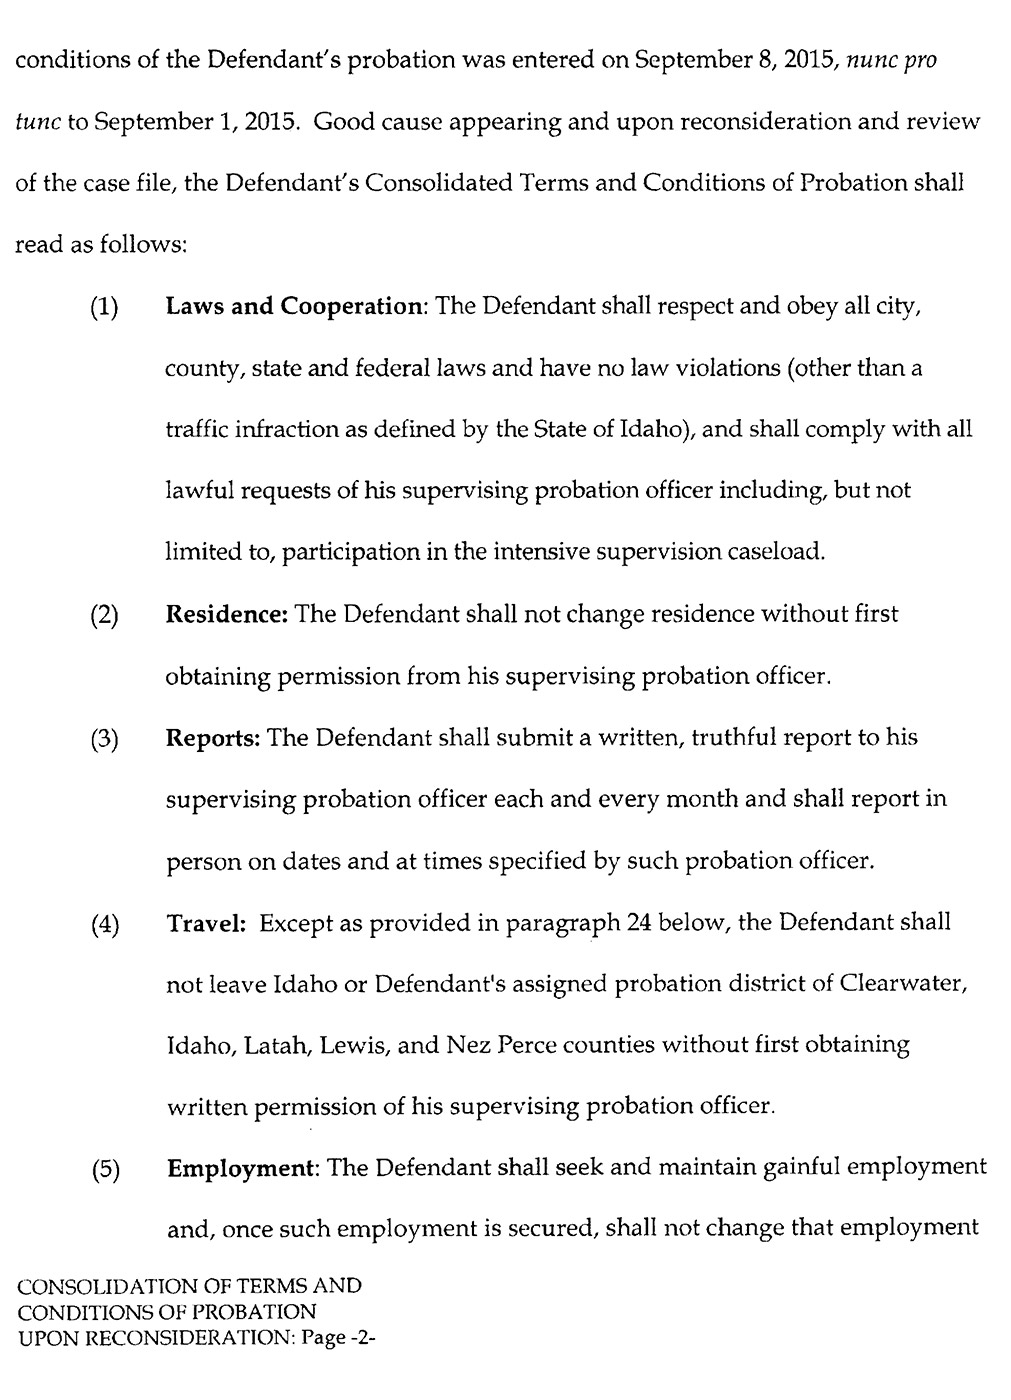 Consolidation of Terms & Conditions of Probation upon Reconsideration page 2